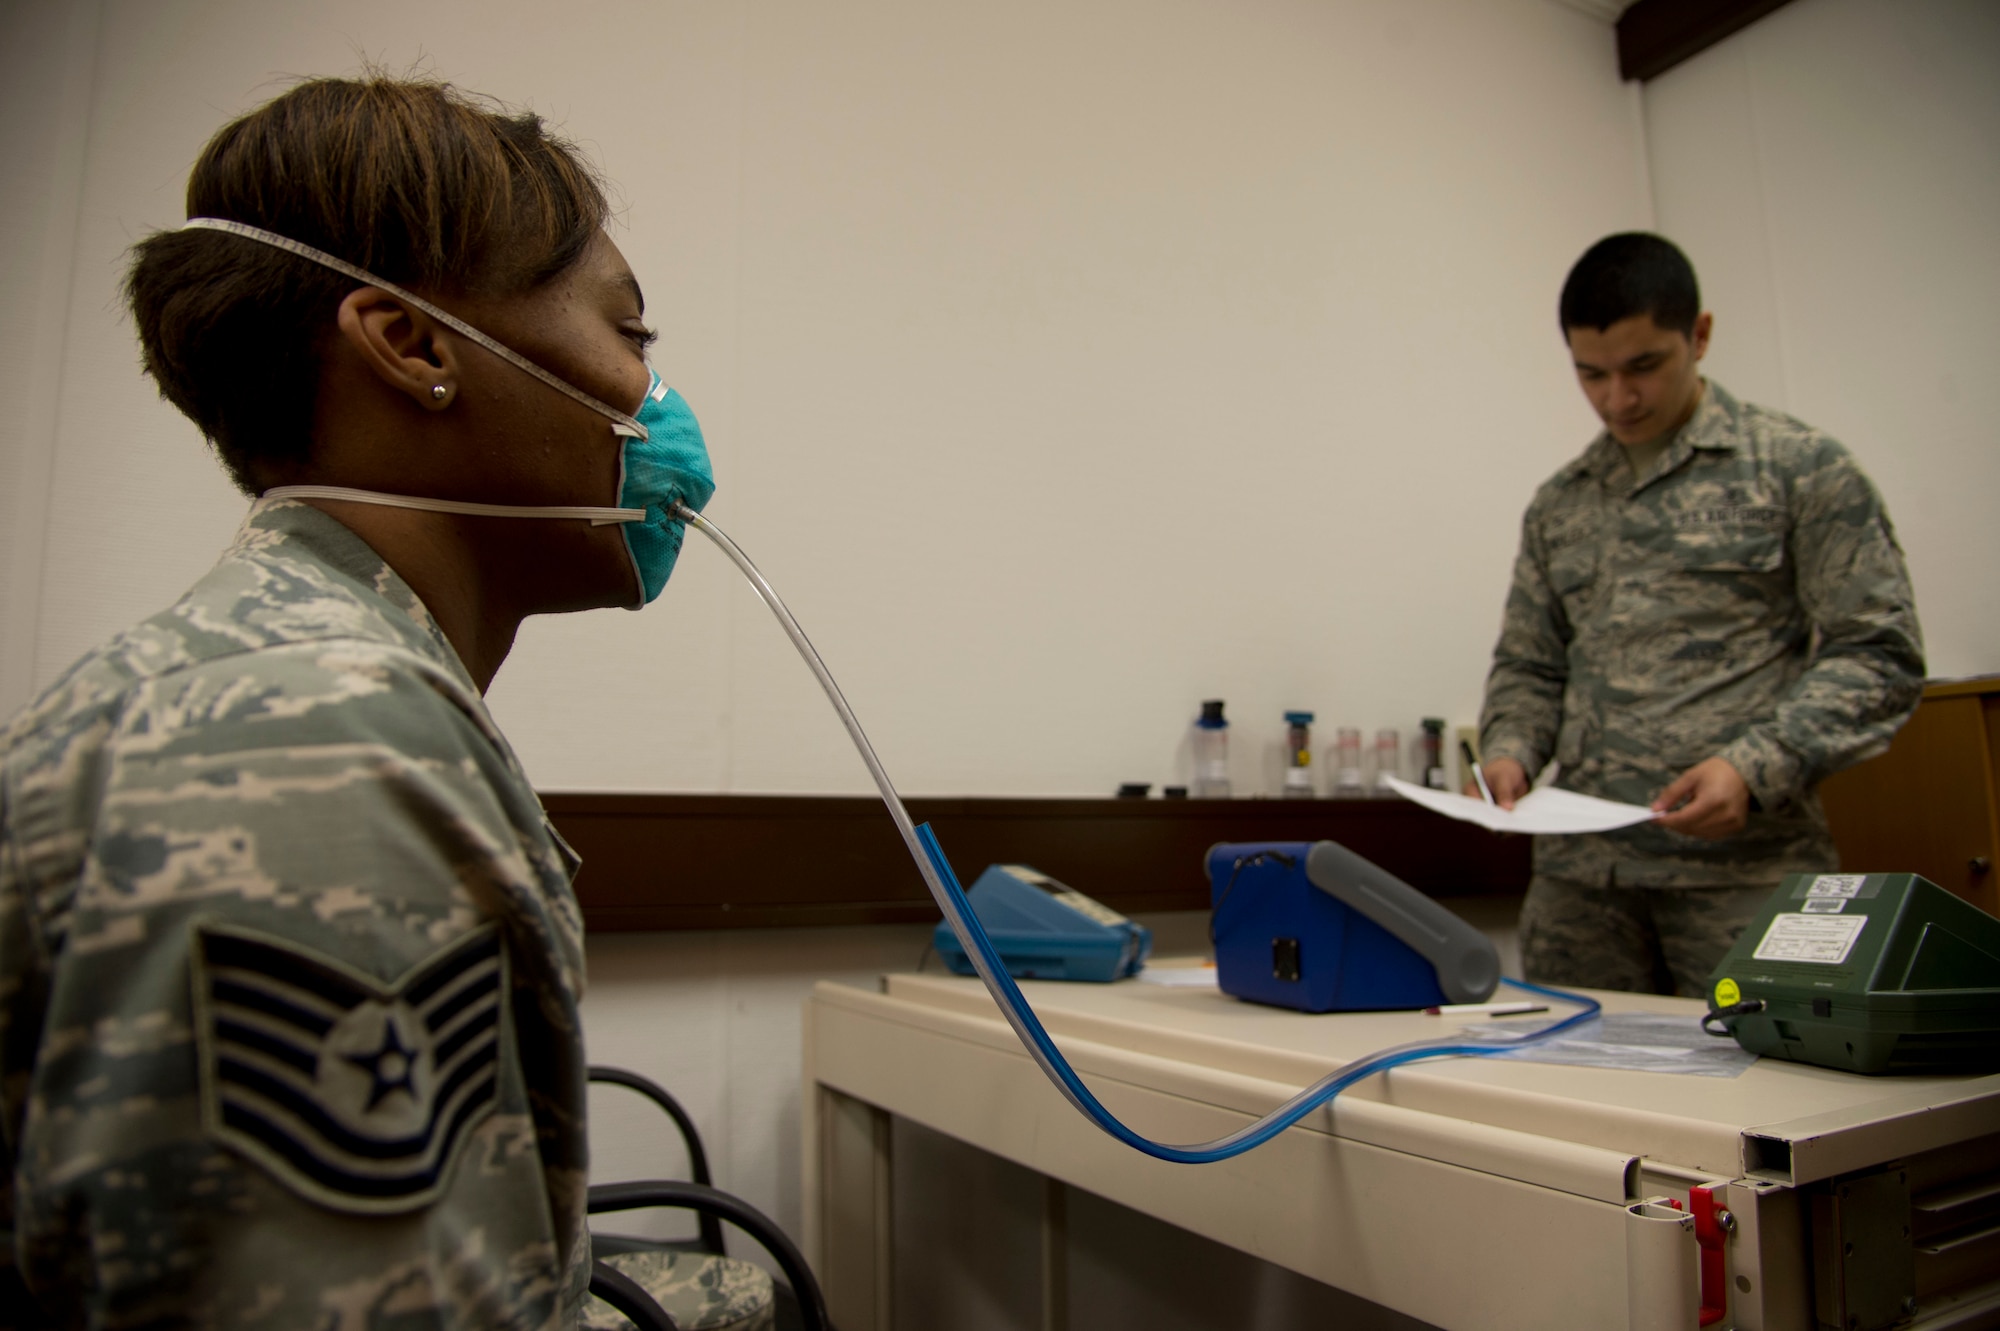 Tech. Sgt. Saquadrea Crosby, 86th Aerospace Medicine Squadron public health NCOIC, gets fitted for an N95 respirator by Airman 1st Class Aaron Gonsalez, 86th Bioenvironmental Engineering technician, at Ramstein Air Base, Germany, Oct. 17, 2014. The N95 respirator is a device that is used to help prevent the spread of germs (viruses and bacteria) from one person to another. As members of the 86th Airlift Wing continue to support missions for Operation United Assistance, Airmen who are expected to interact with returnees from Ebola infected areas will be fitted for the N95 respirators. (U.S. Air Force photo by Staff Sgt. Sara Keller)